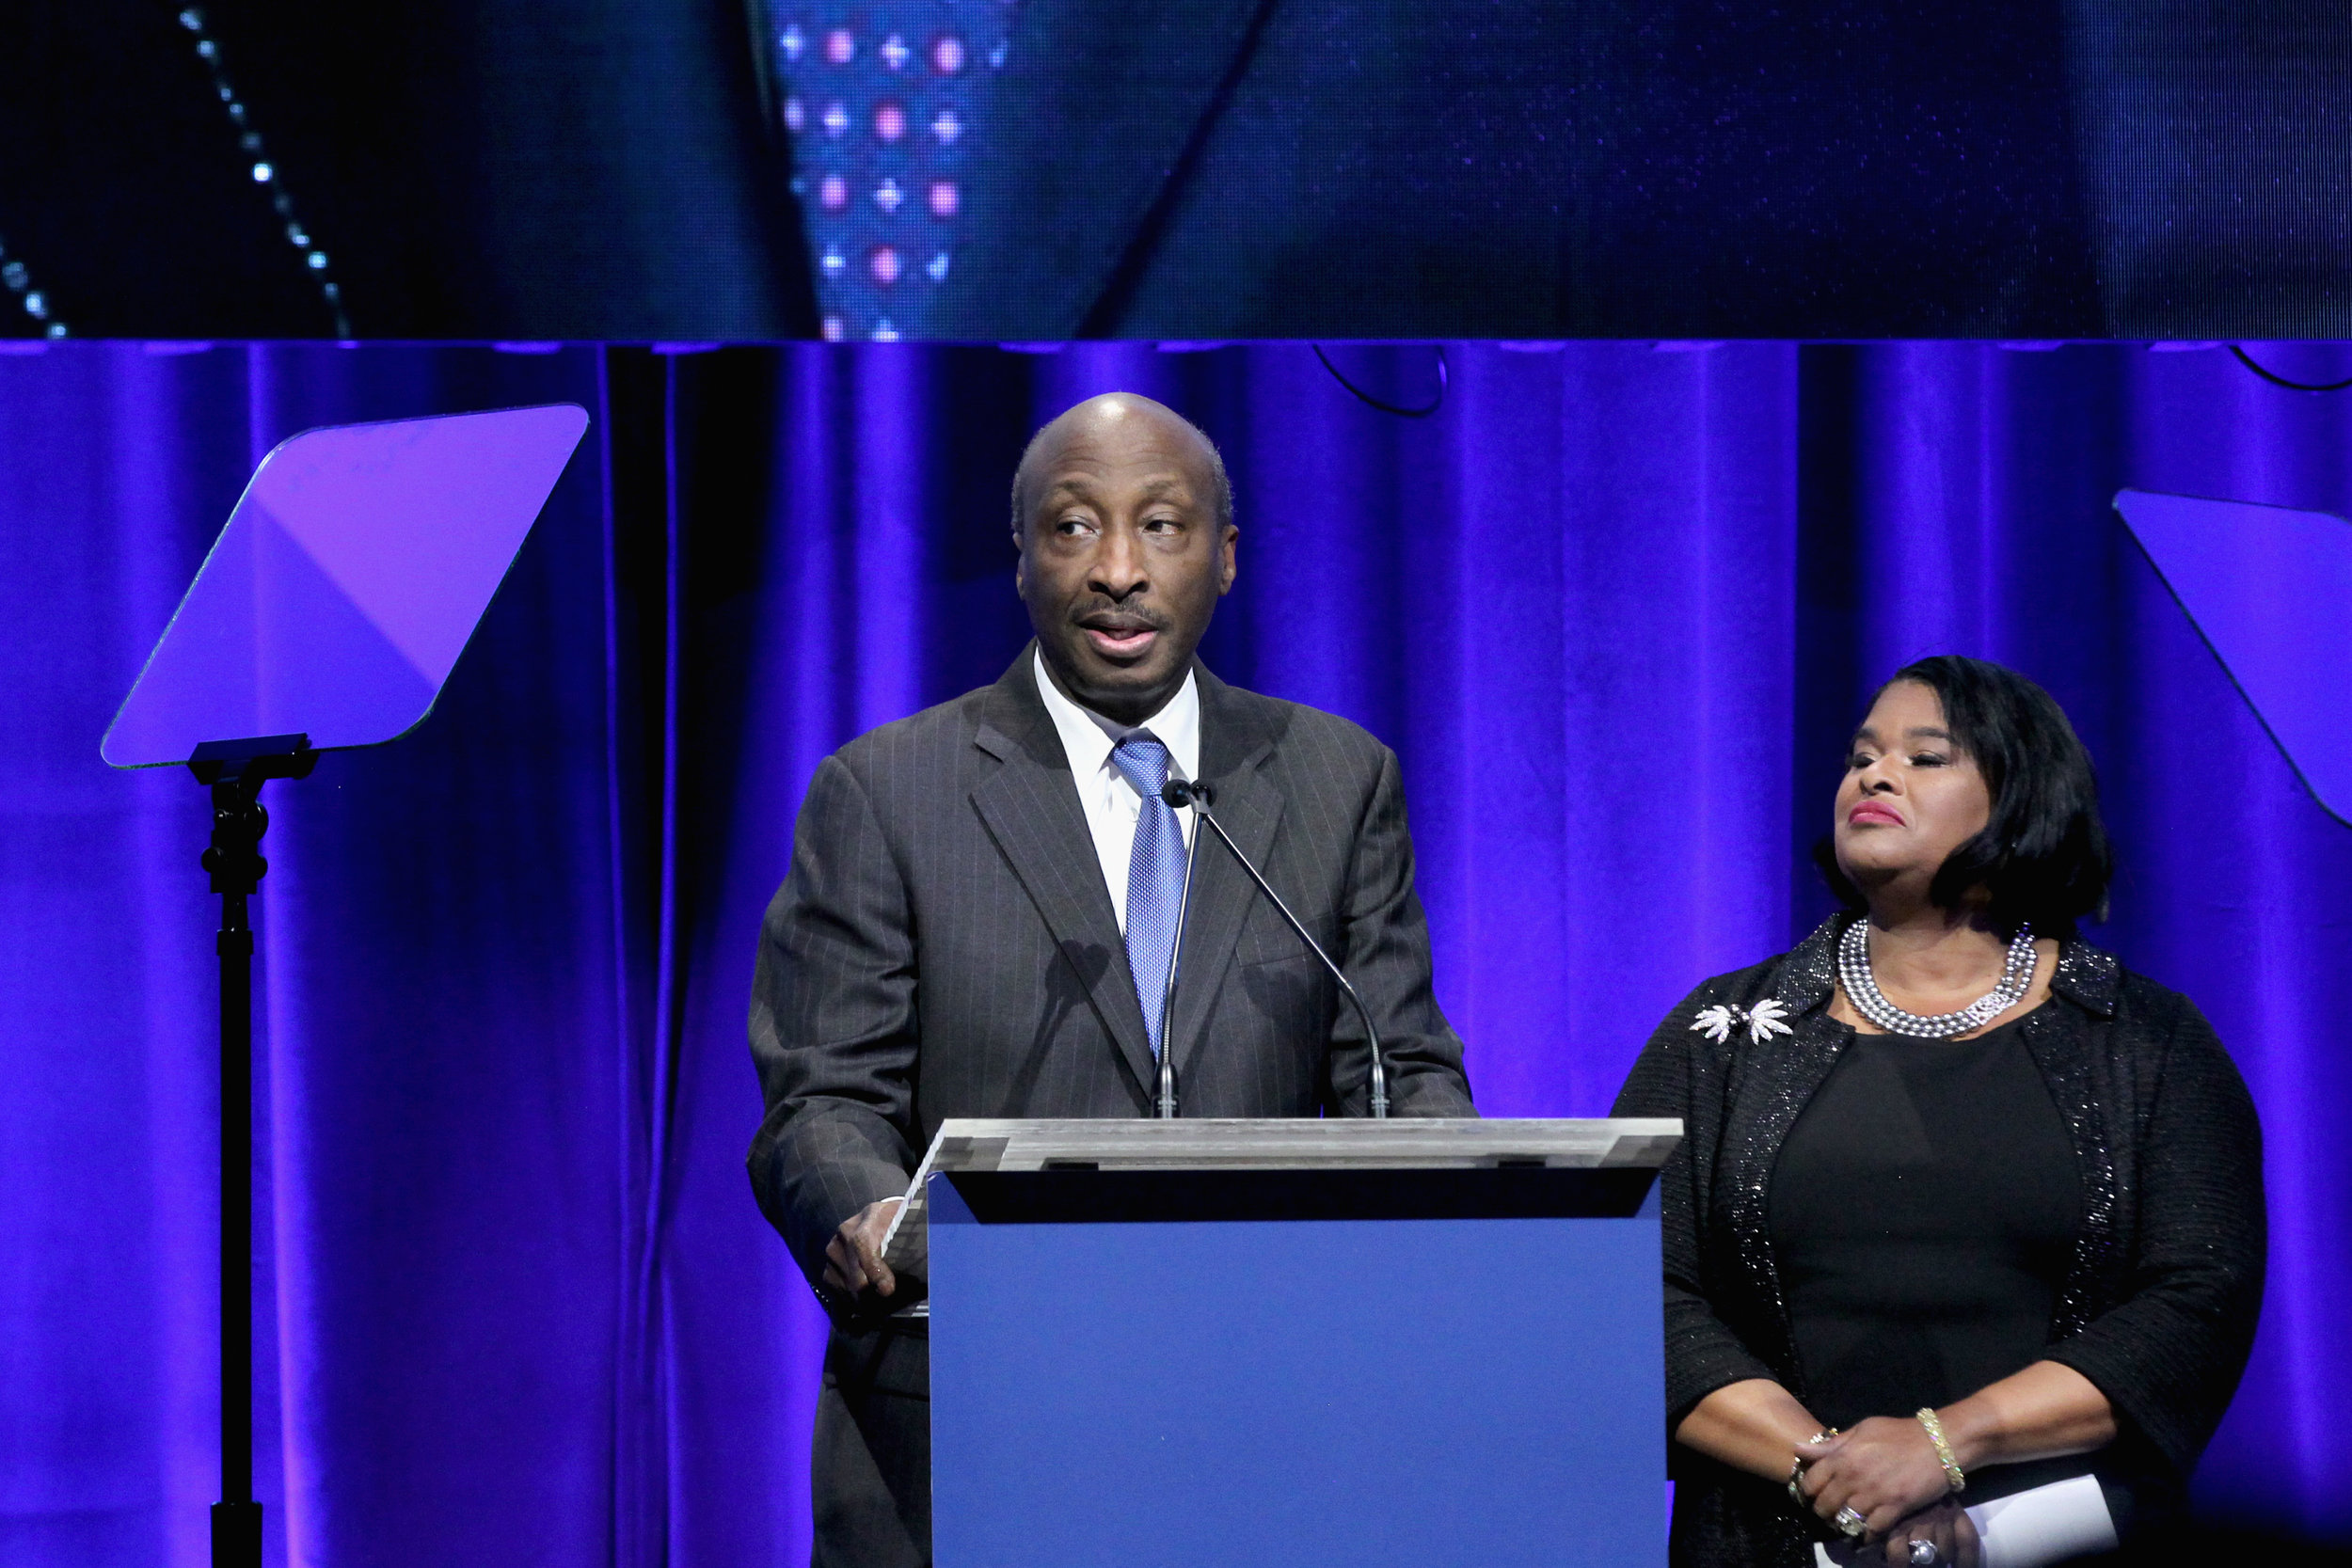  Kenneth Frazier and Robyn Coles speak onstage at the NAACP LDF 32nd National Equal Justice Awards Dinner at The Ziegfeld Ballroom on November 1, 2018 in New York City. (Photo by Bennett Raglin/Getty Images for NAACP LDF) 